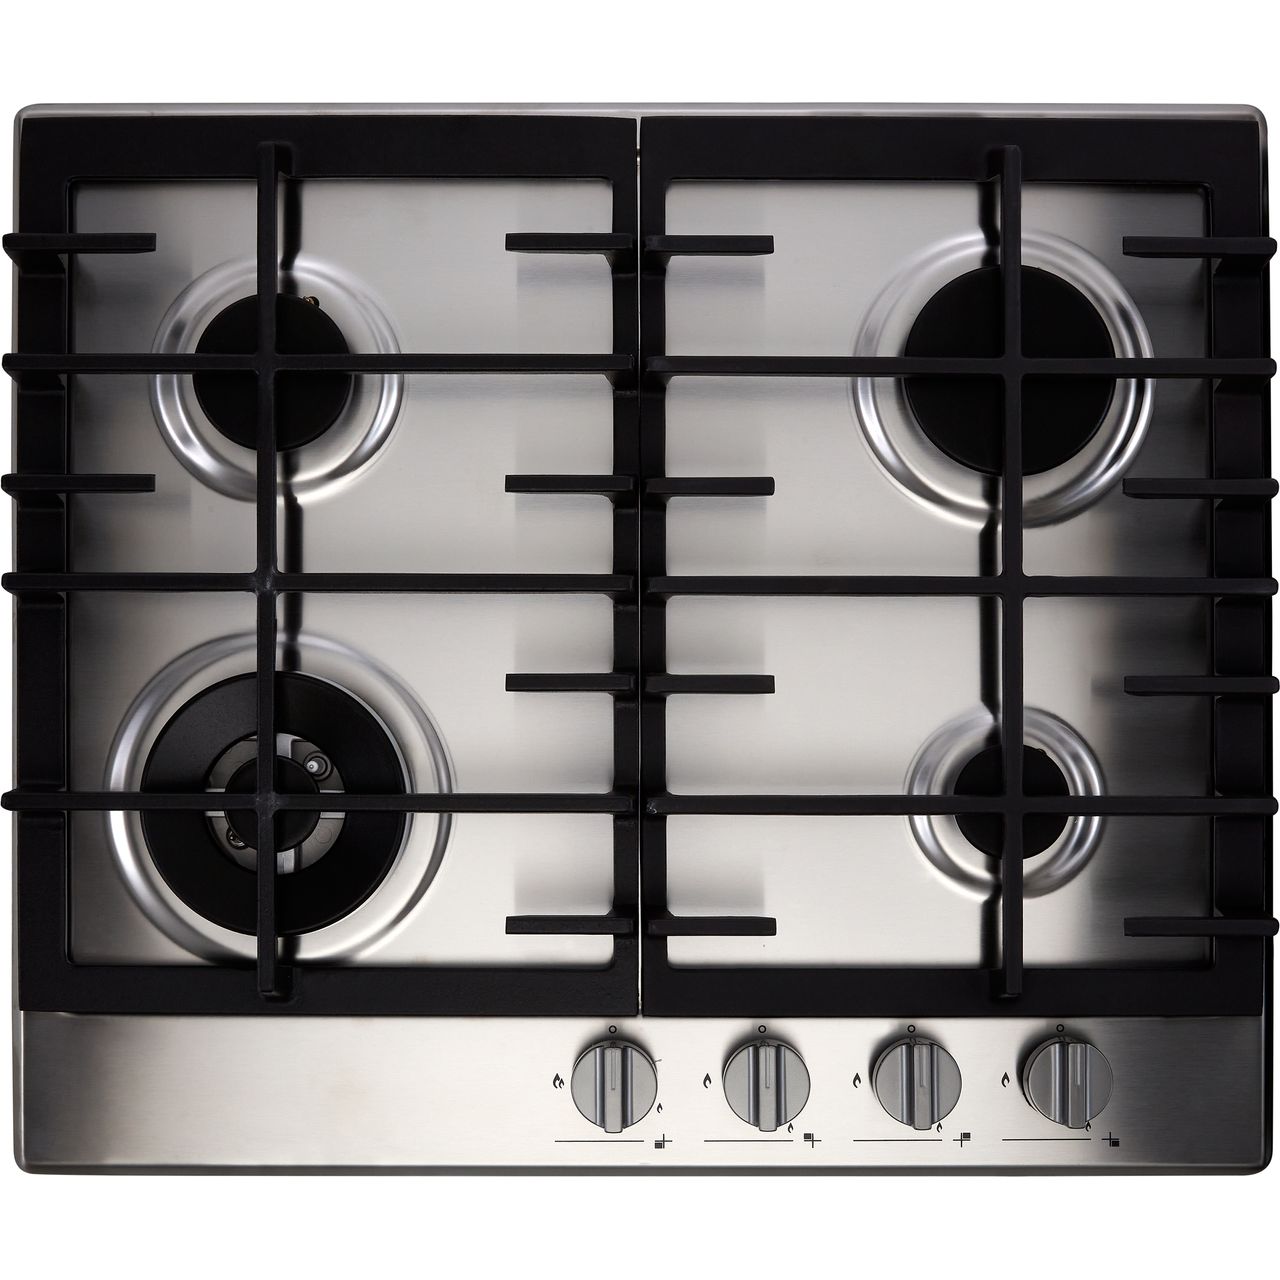 C4071G 76cm Gas Hob Stainless Steel